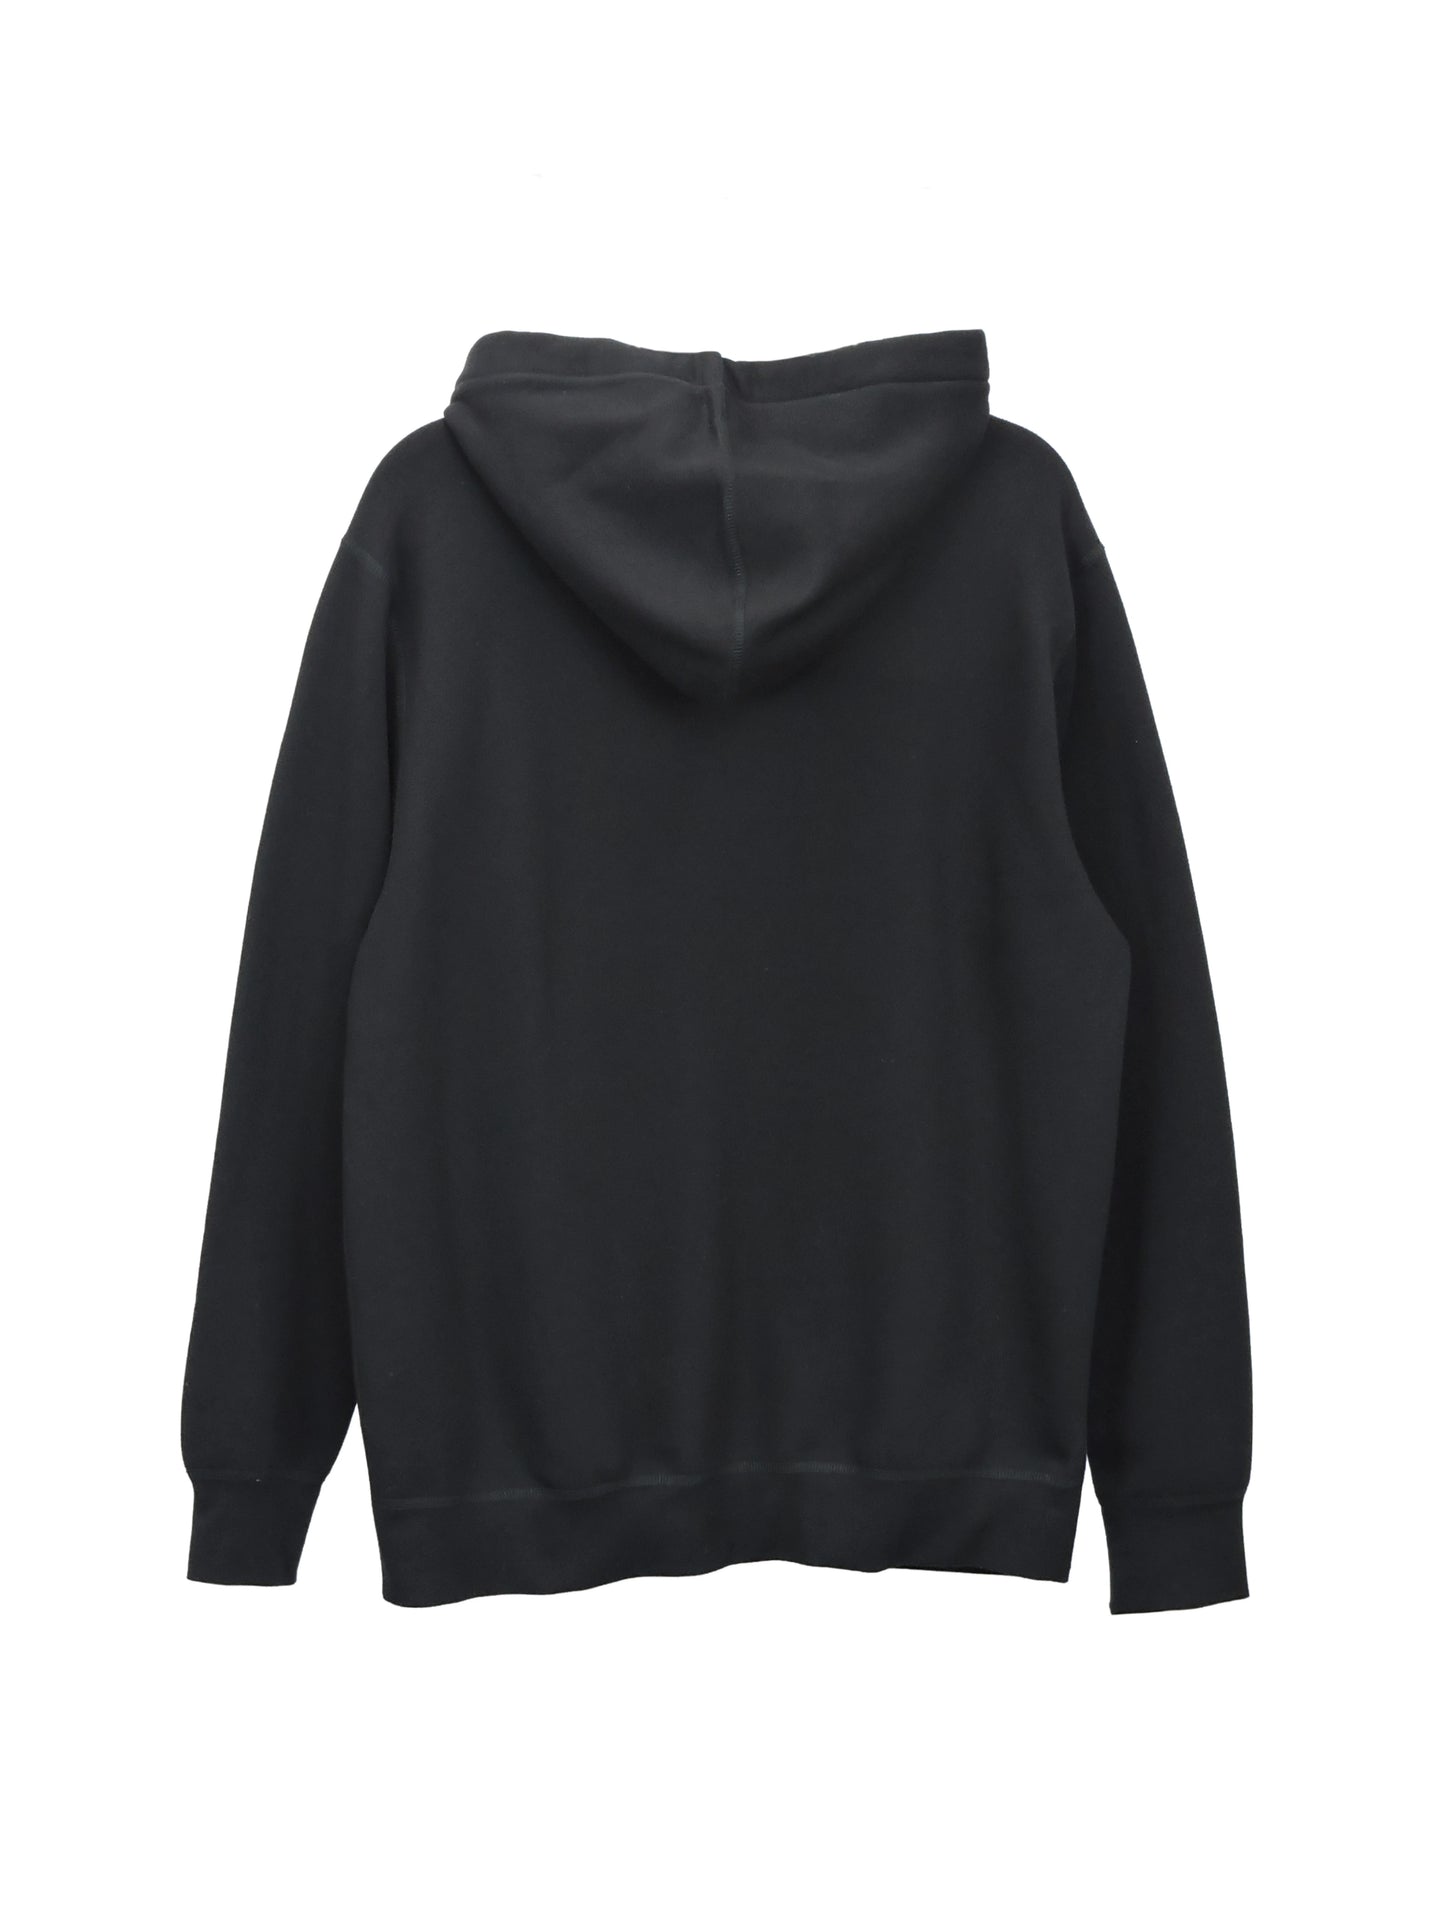 Back of hoodie, displaying hood and soft fleece cotton material